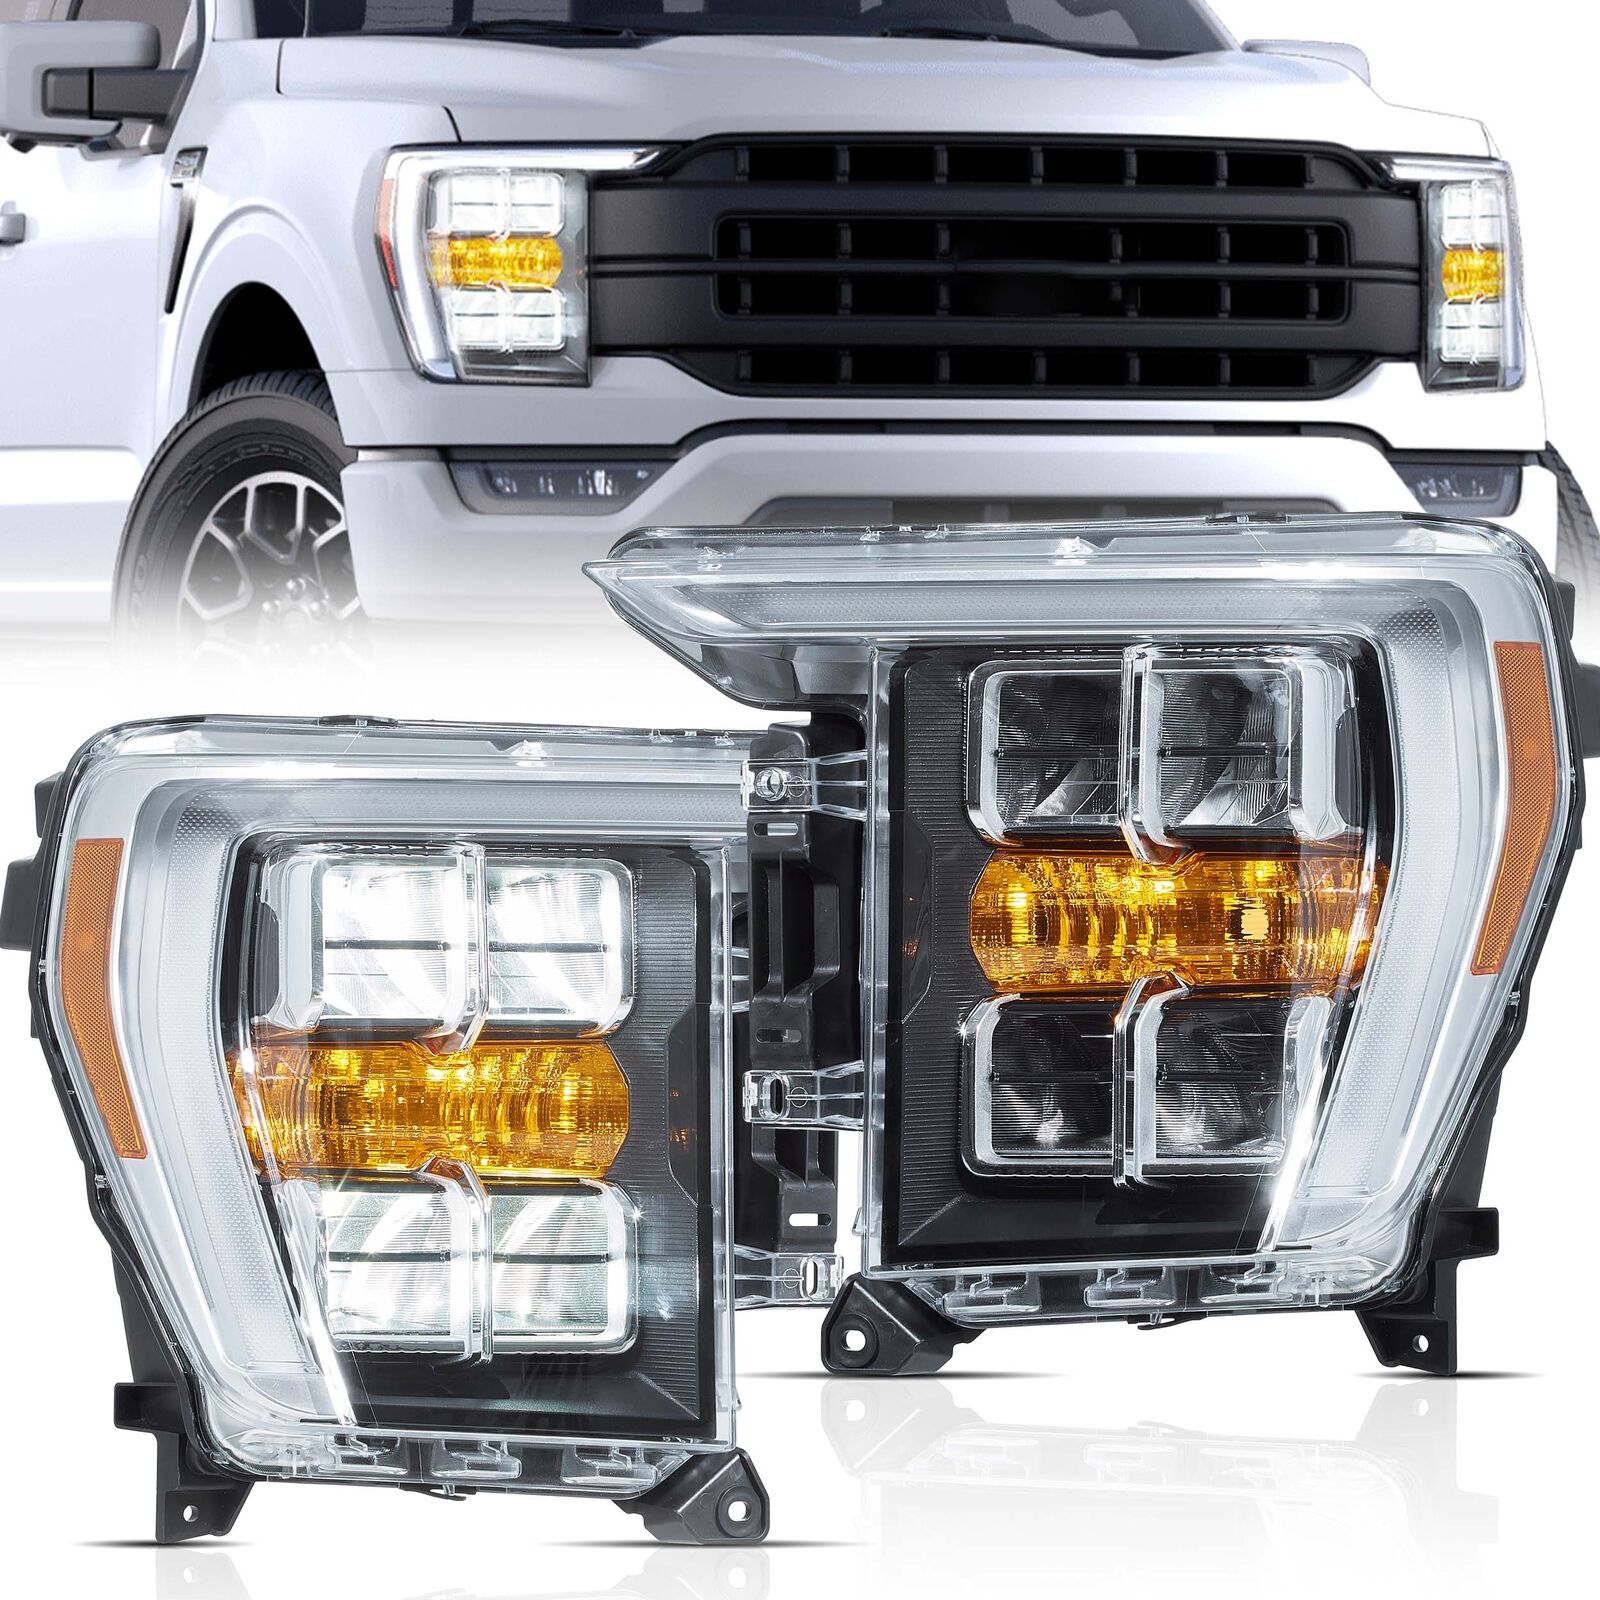 VLAND LED Reflector Headlights For 2021 2022 2023 Ford F150 F-150 Headlamps Pair